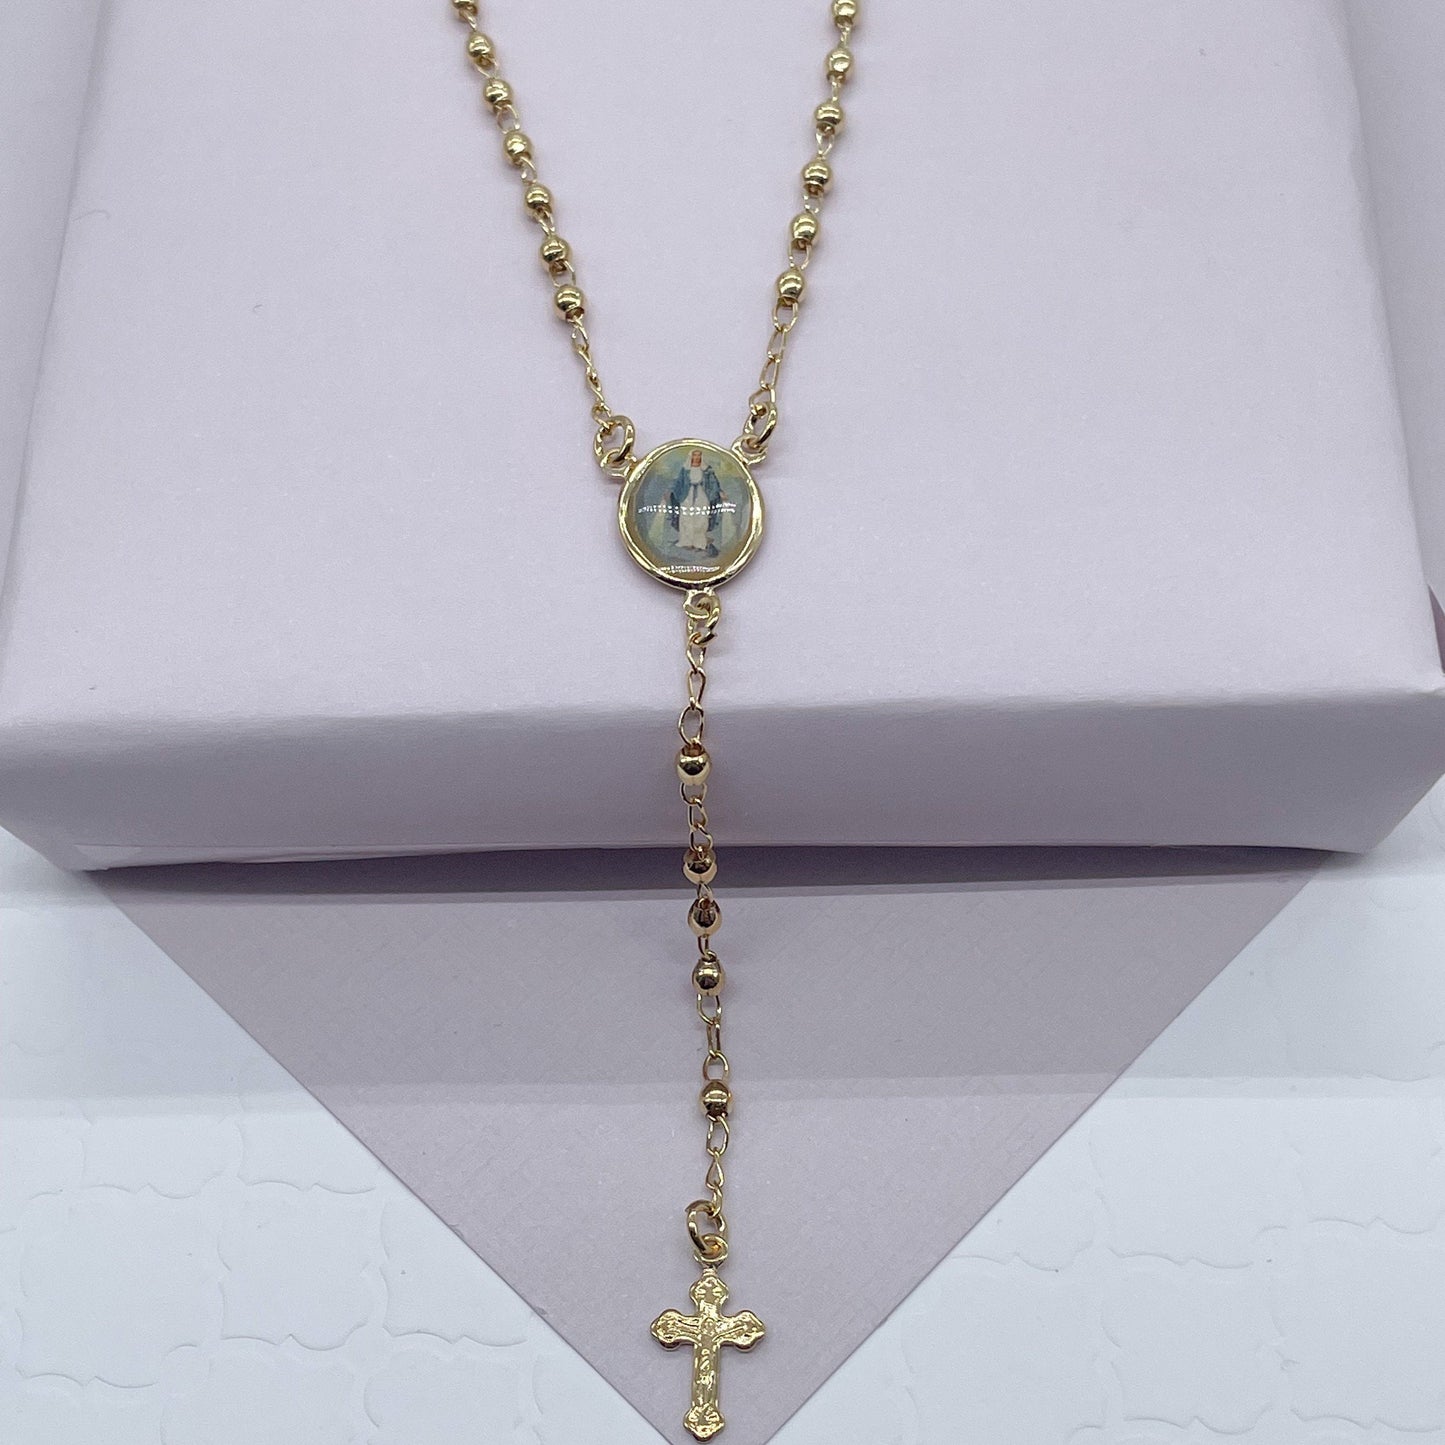 18k Gold Layered Small Balls Fashion Rosary Necklace with Virgin Image Photo,